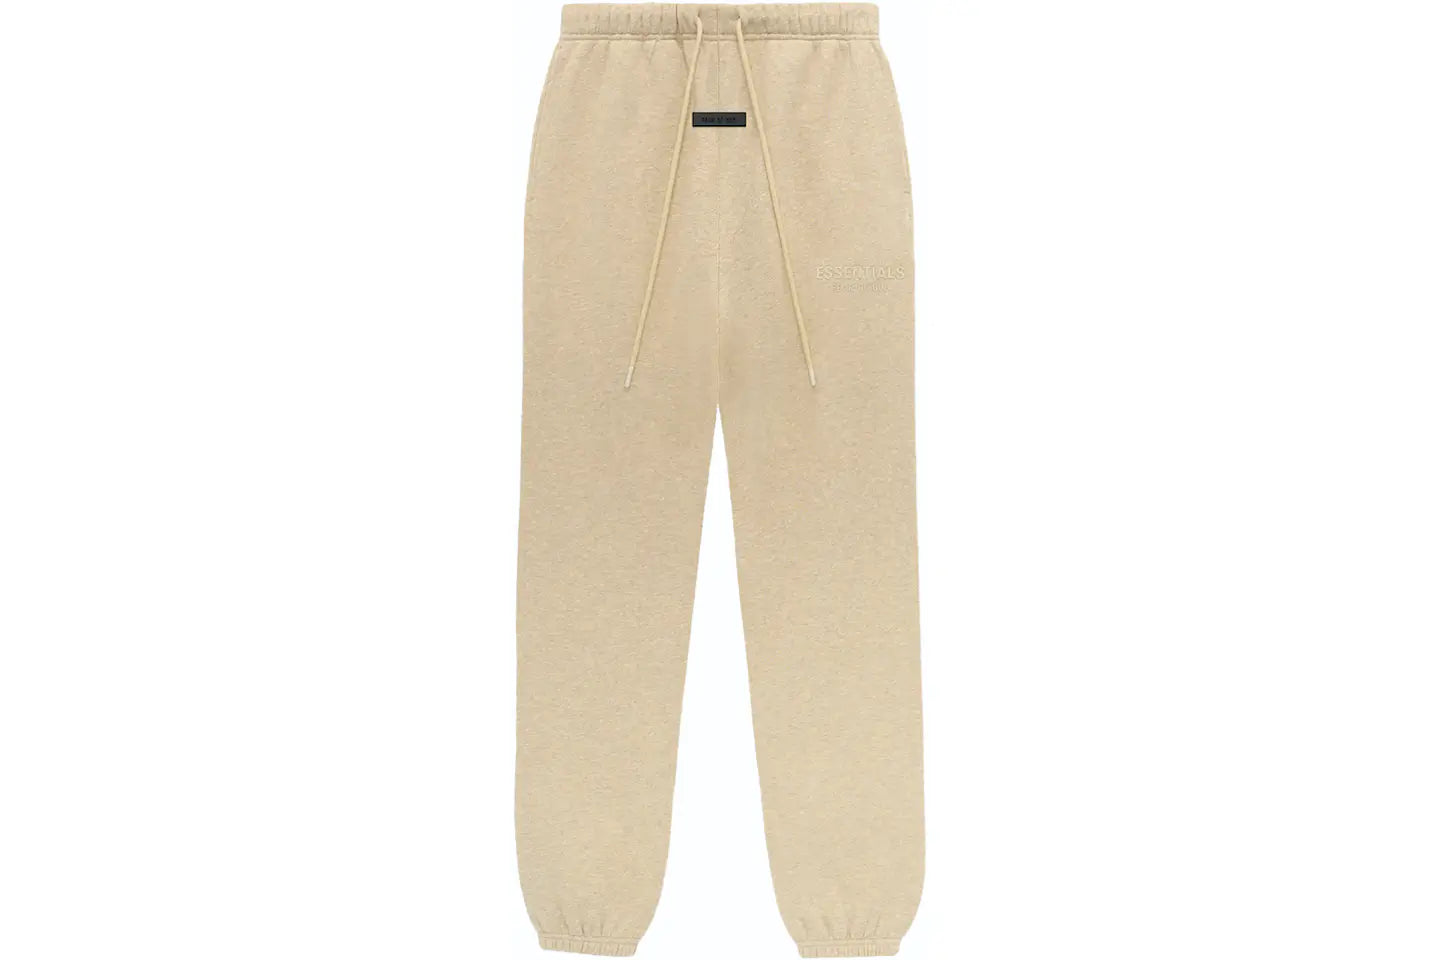 Buy Fear of God Essentials Neutral Essentials Sweatpants in Jersey